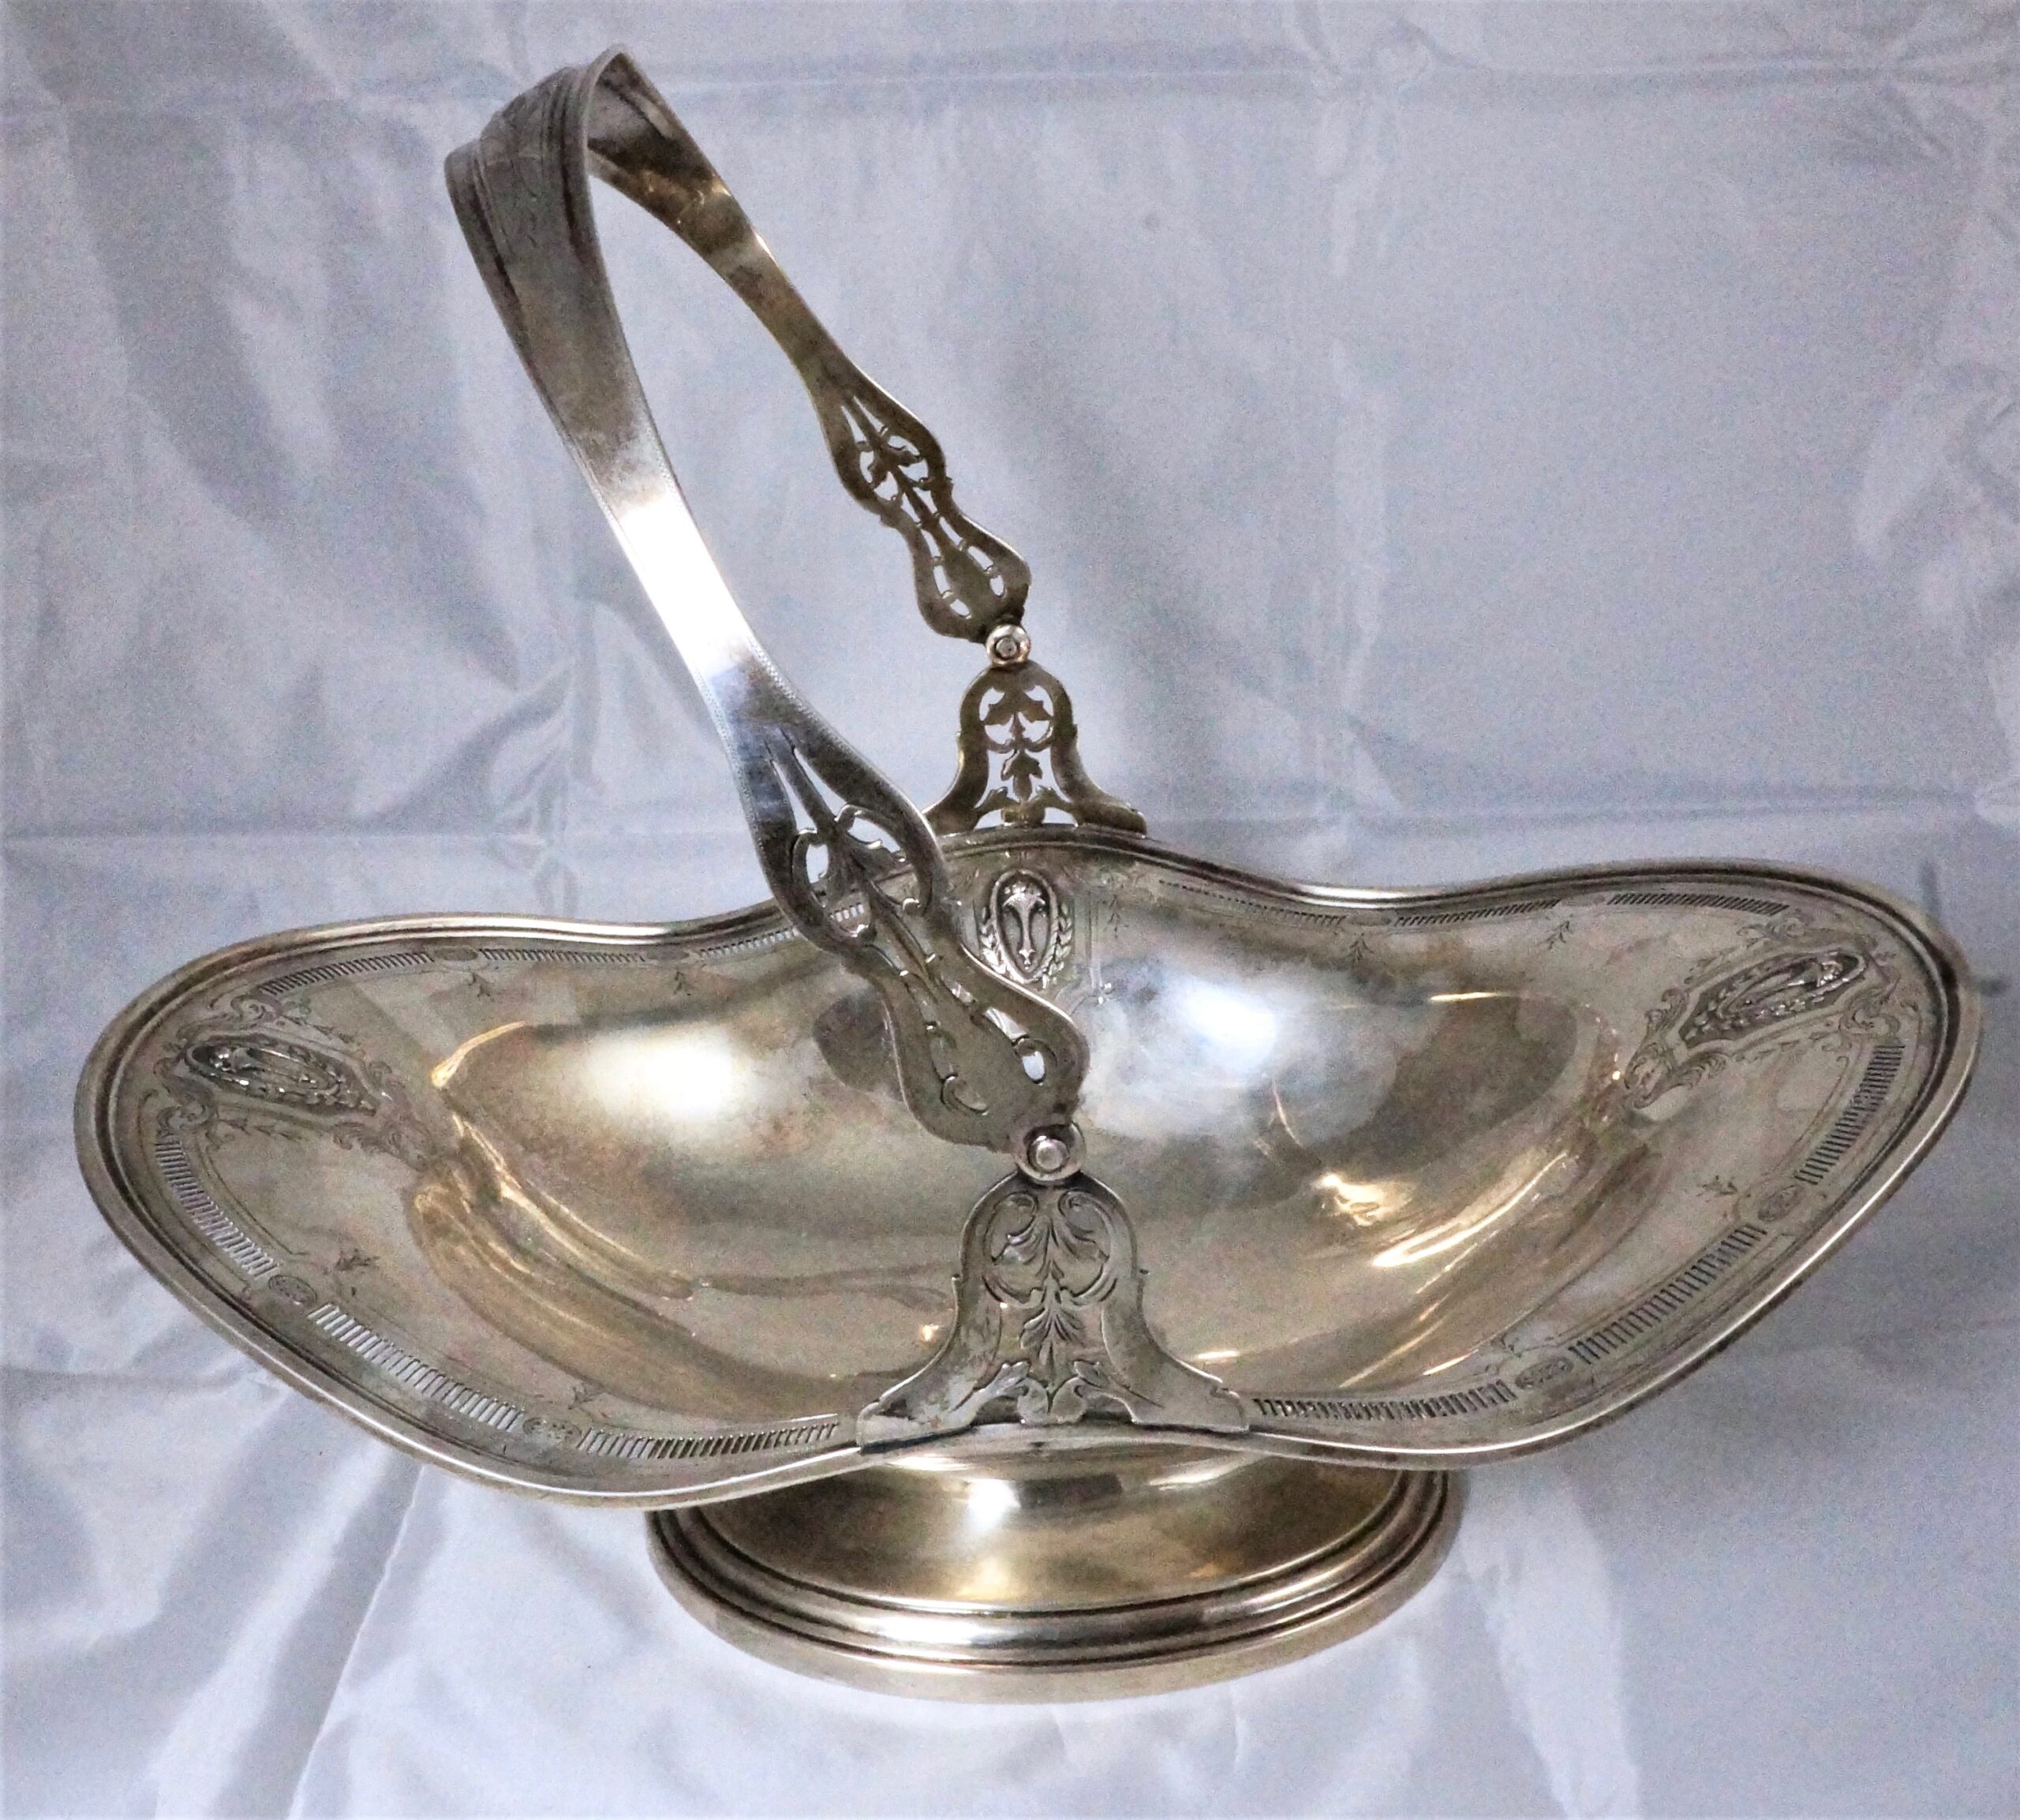 A Whiting Louis XV Sterling Silver Fruit Basket (Lot 2073 - The